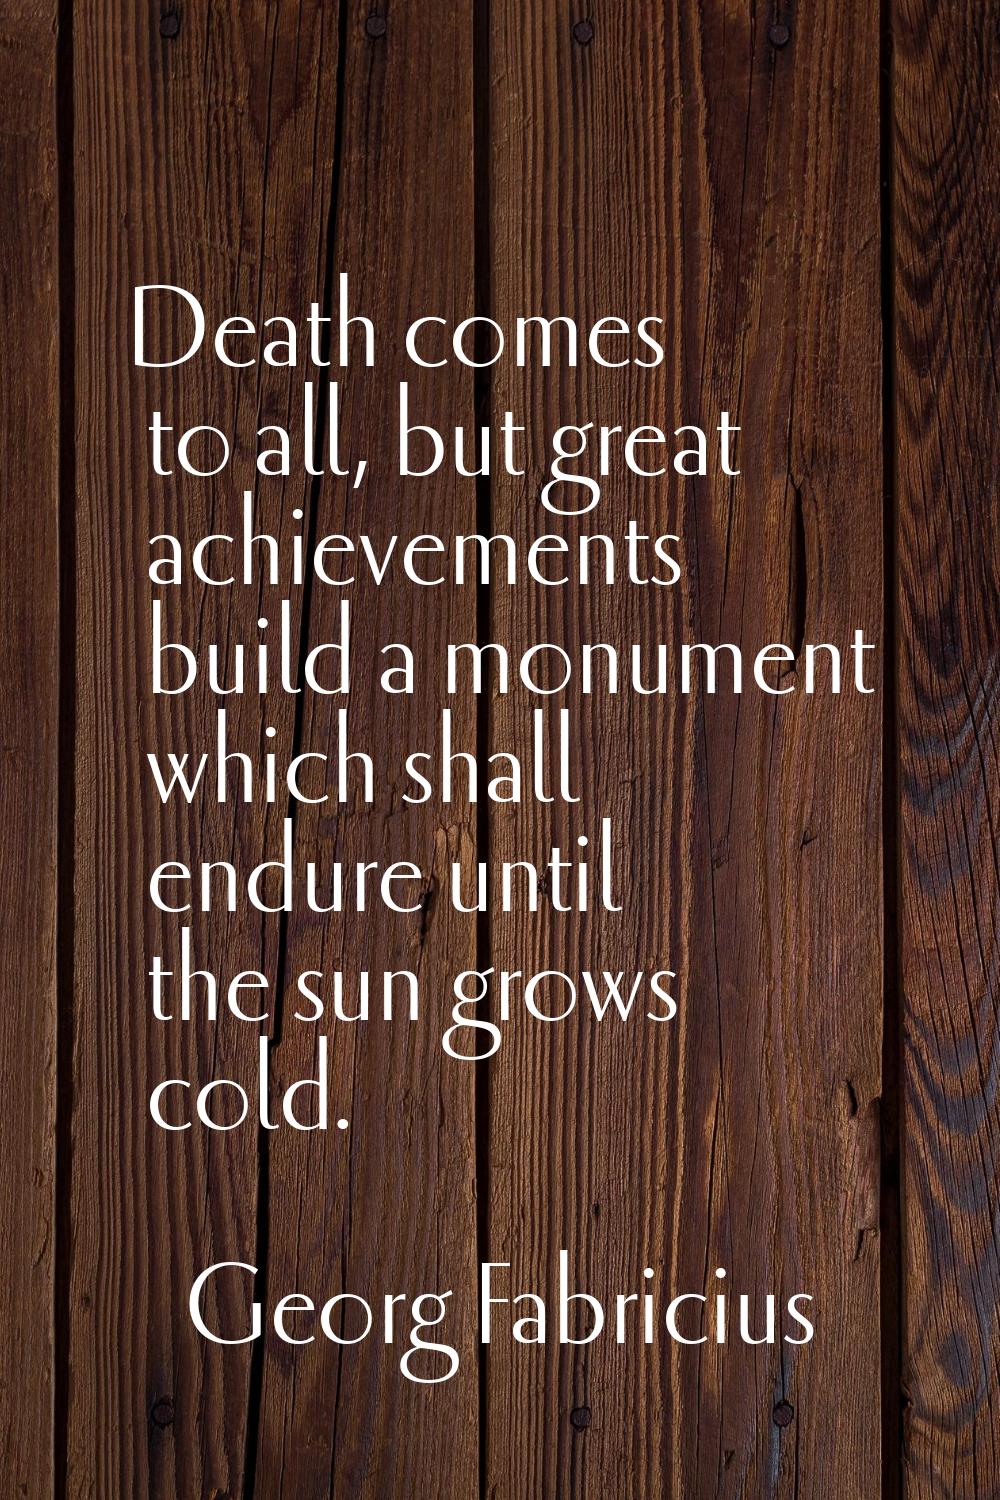 Death comes to all, but great achievements build a monument which shall endure until the sun grows 